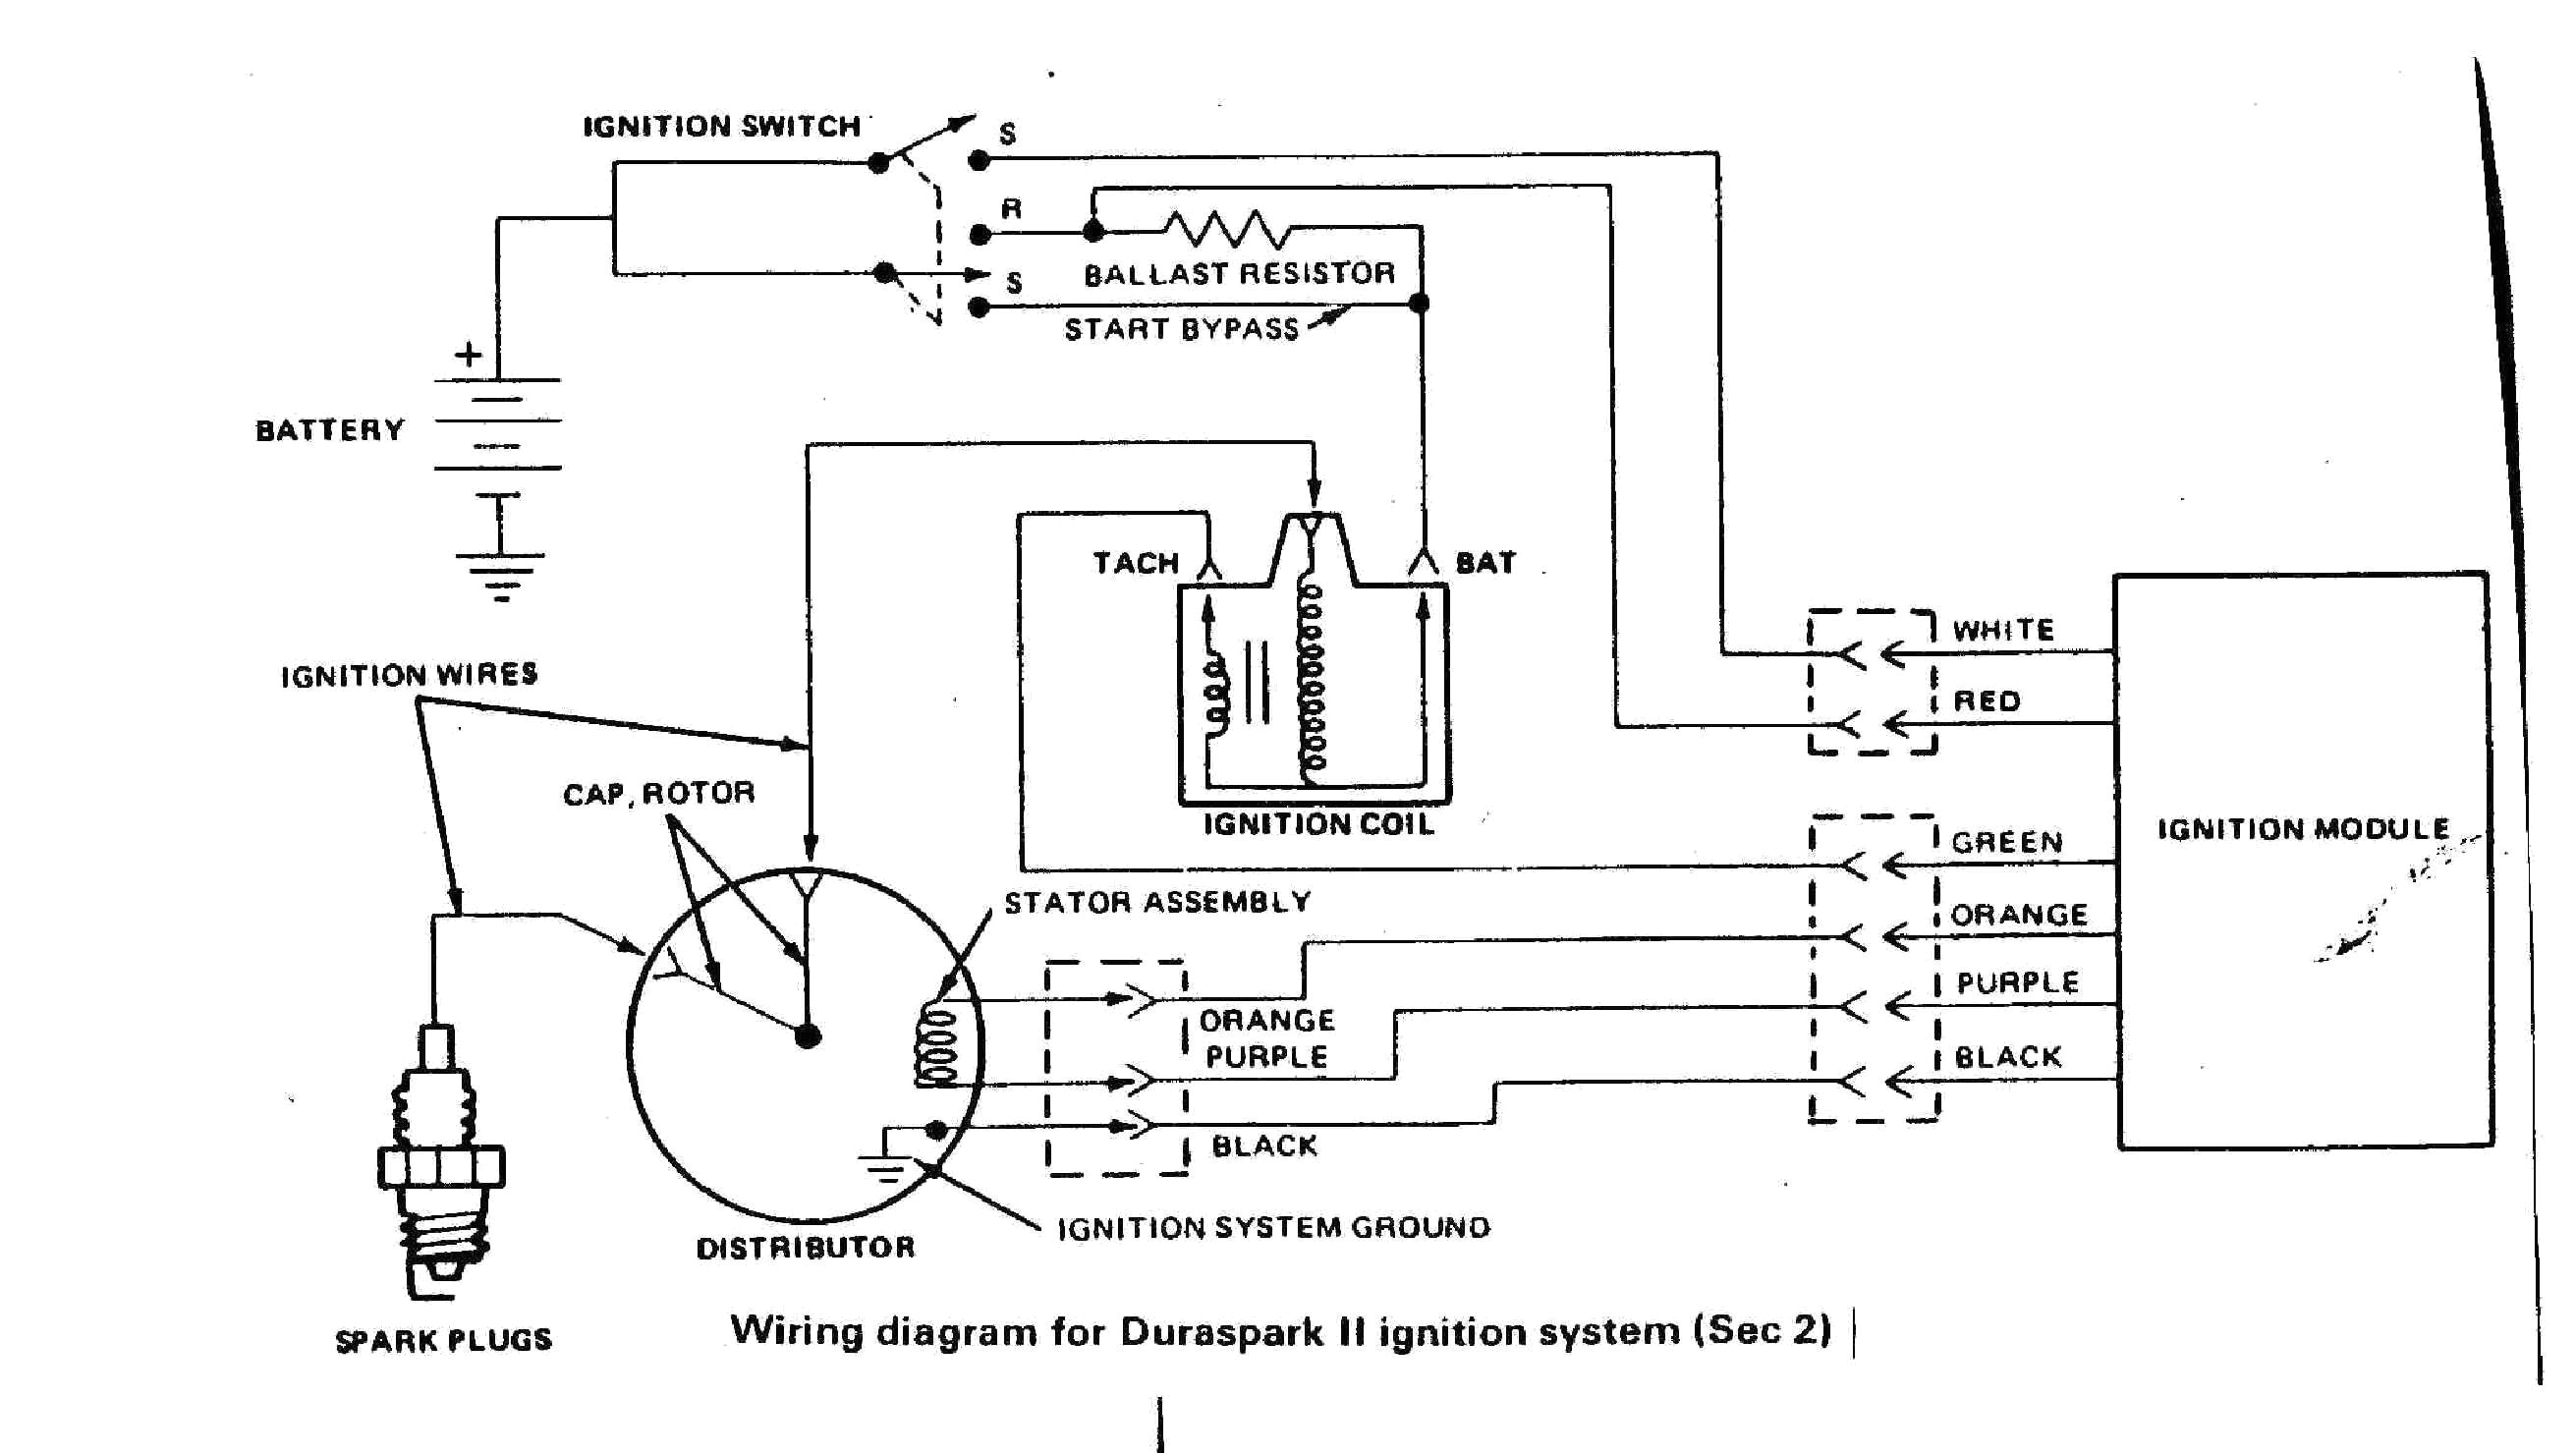 ignition system diagram pictures to pin on pinterest schema wiring ignition system diagram pictures to pin on pinterest